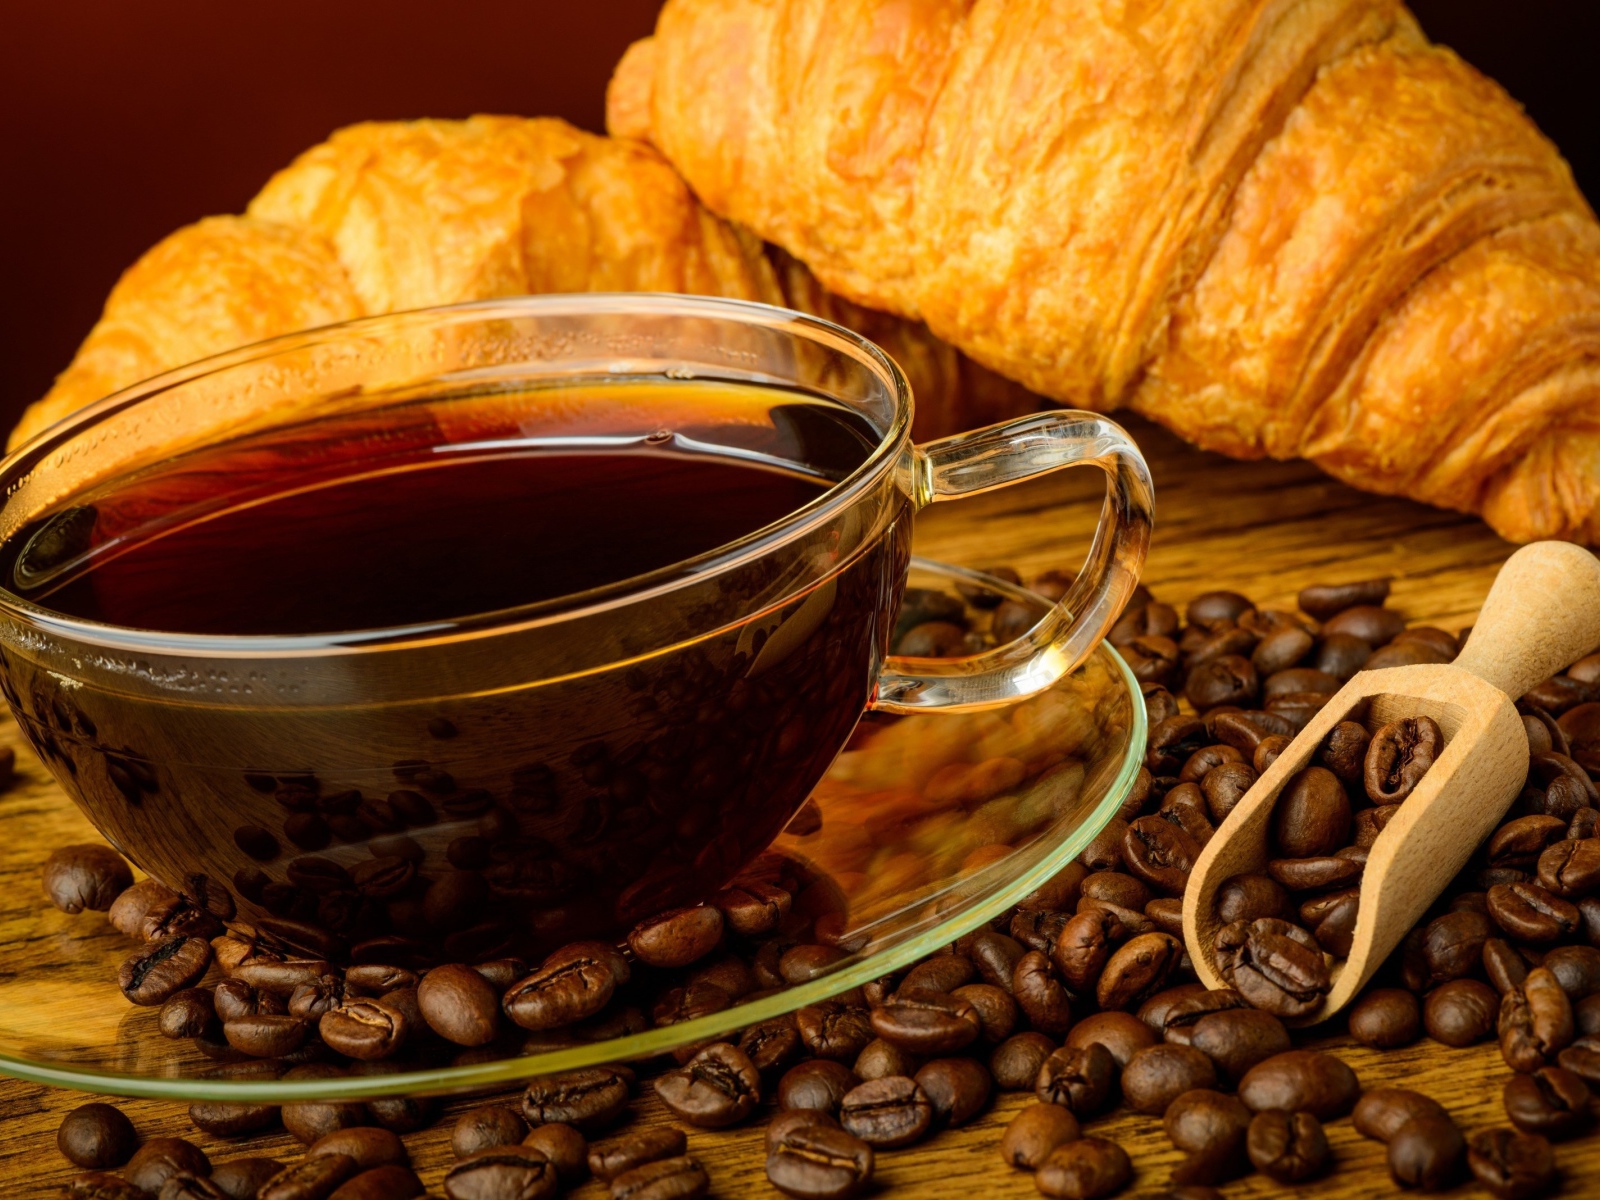 Glass cup of coffee with grains and fresh croissants on the table